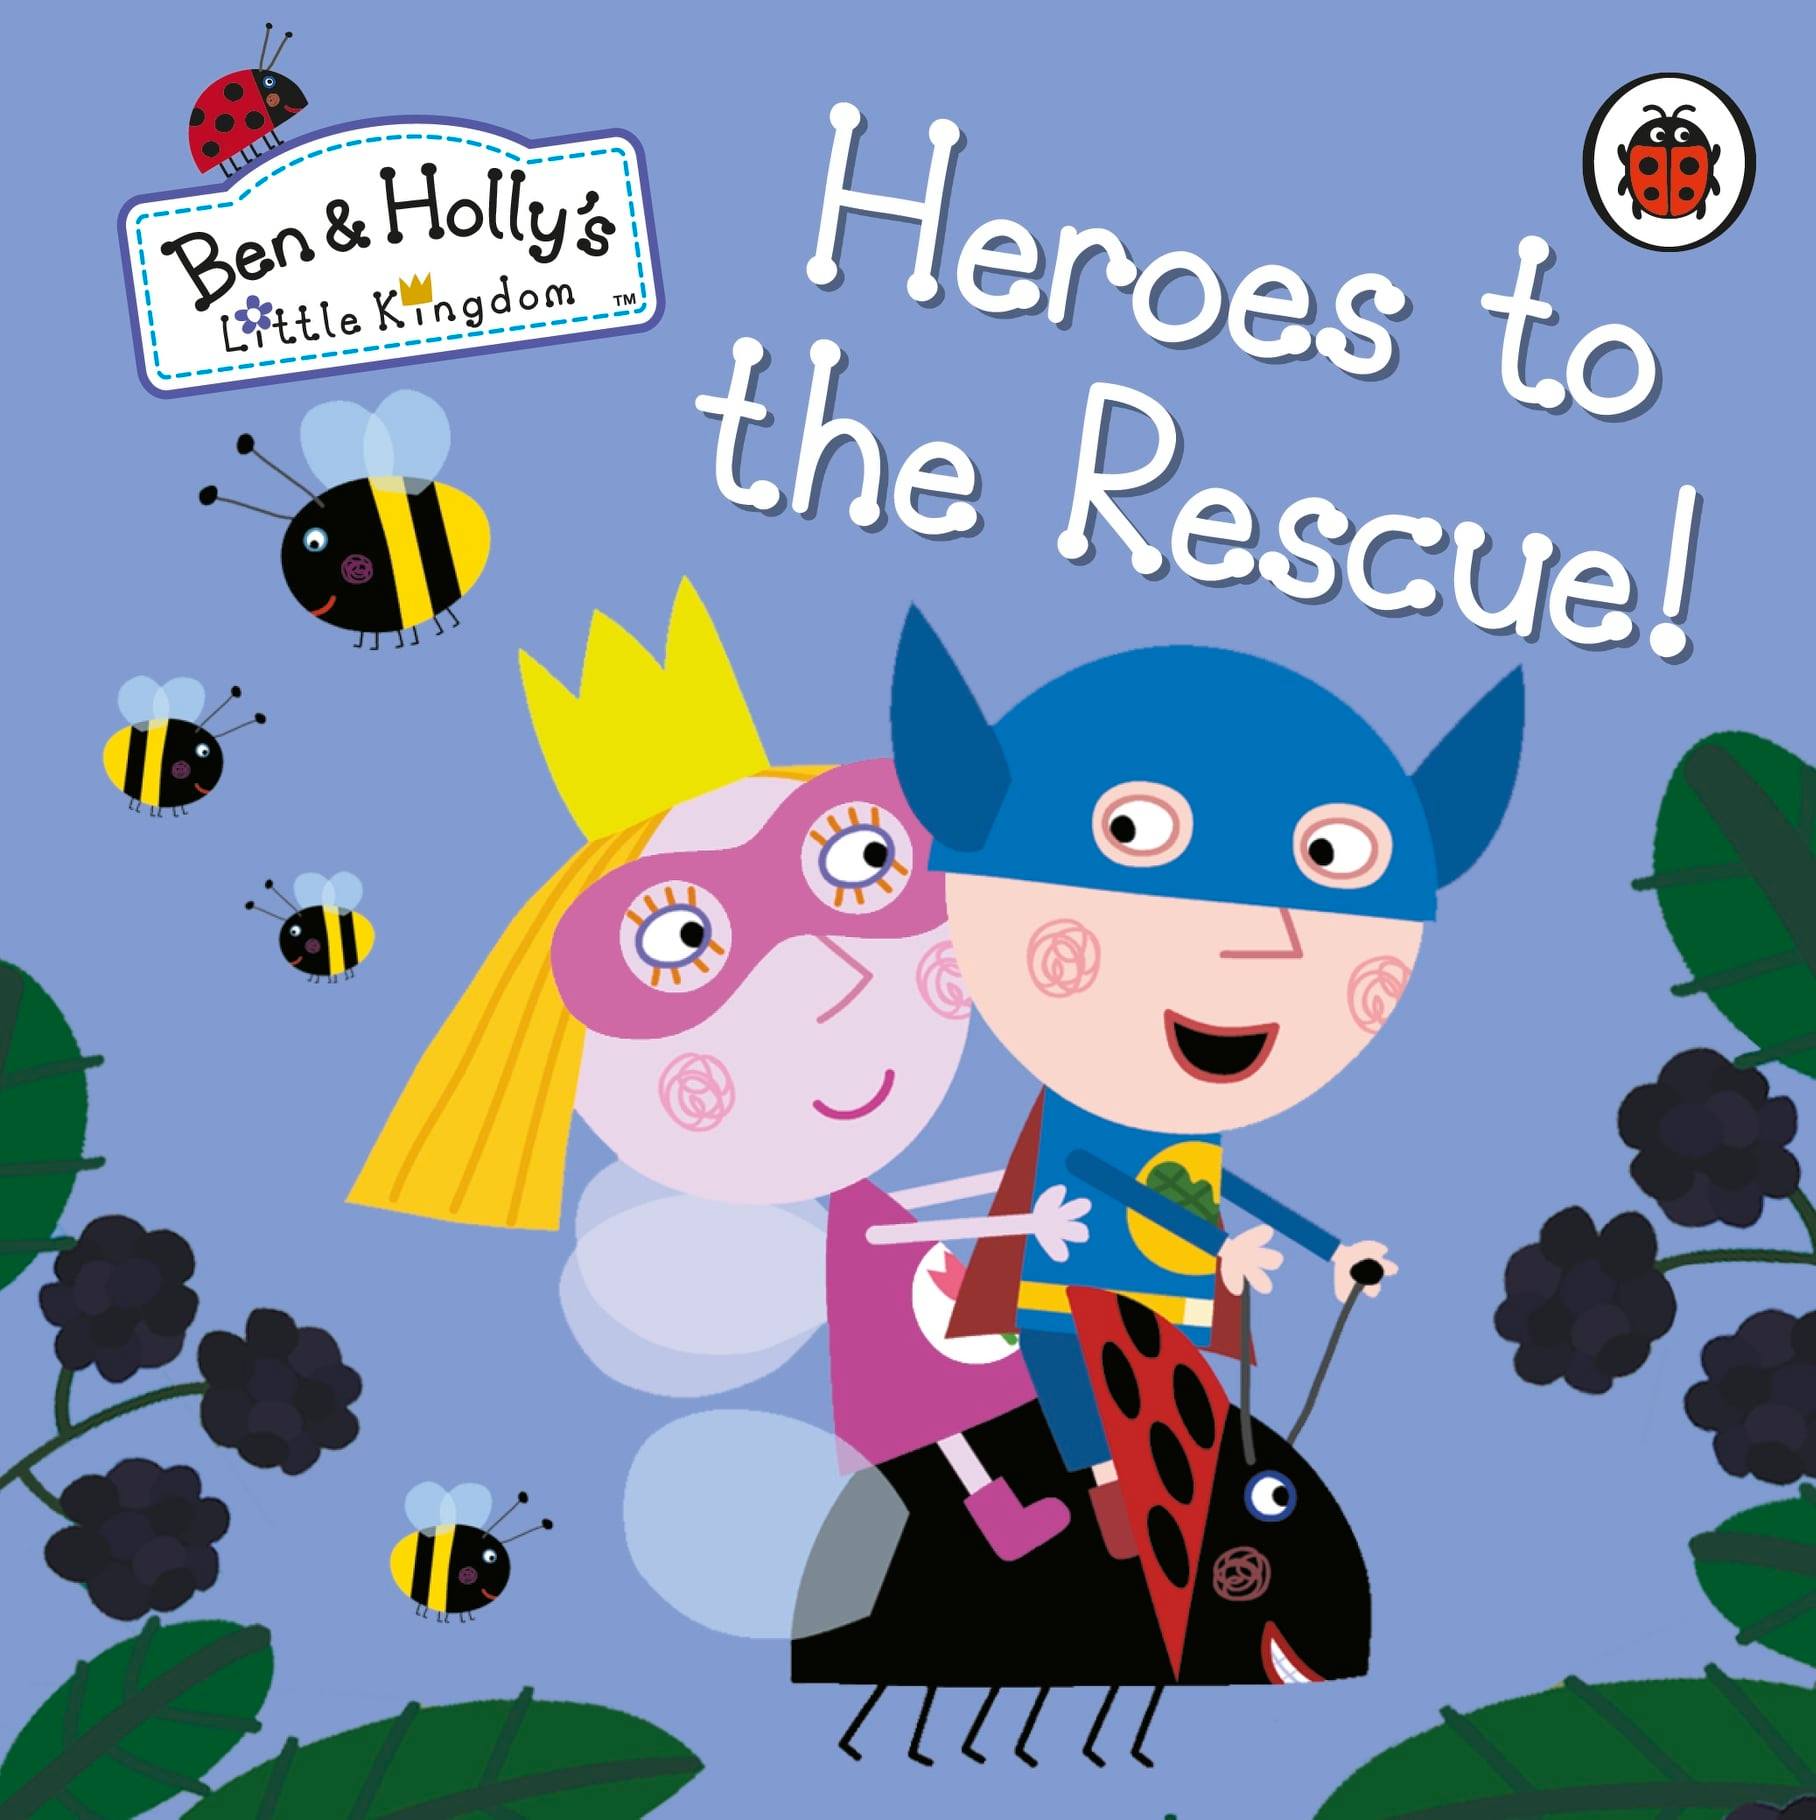 Ben-and-Hollys-Little-Kingdom:-Heroes-to-the-RescueBoard-Book